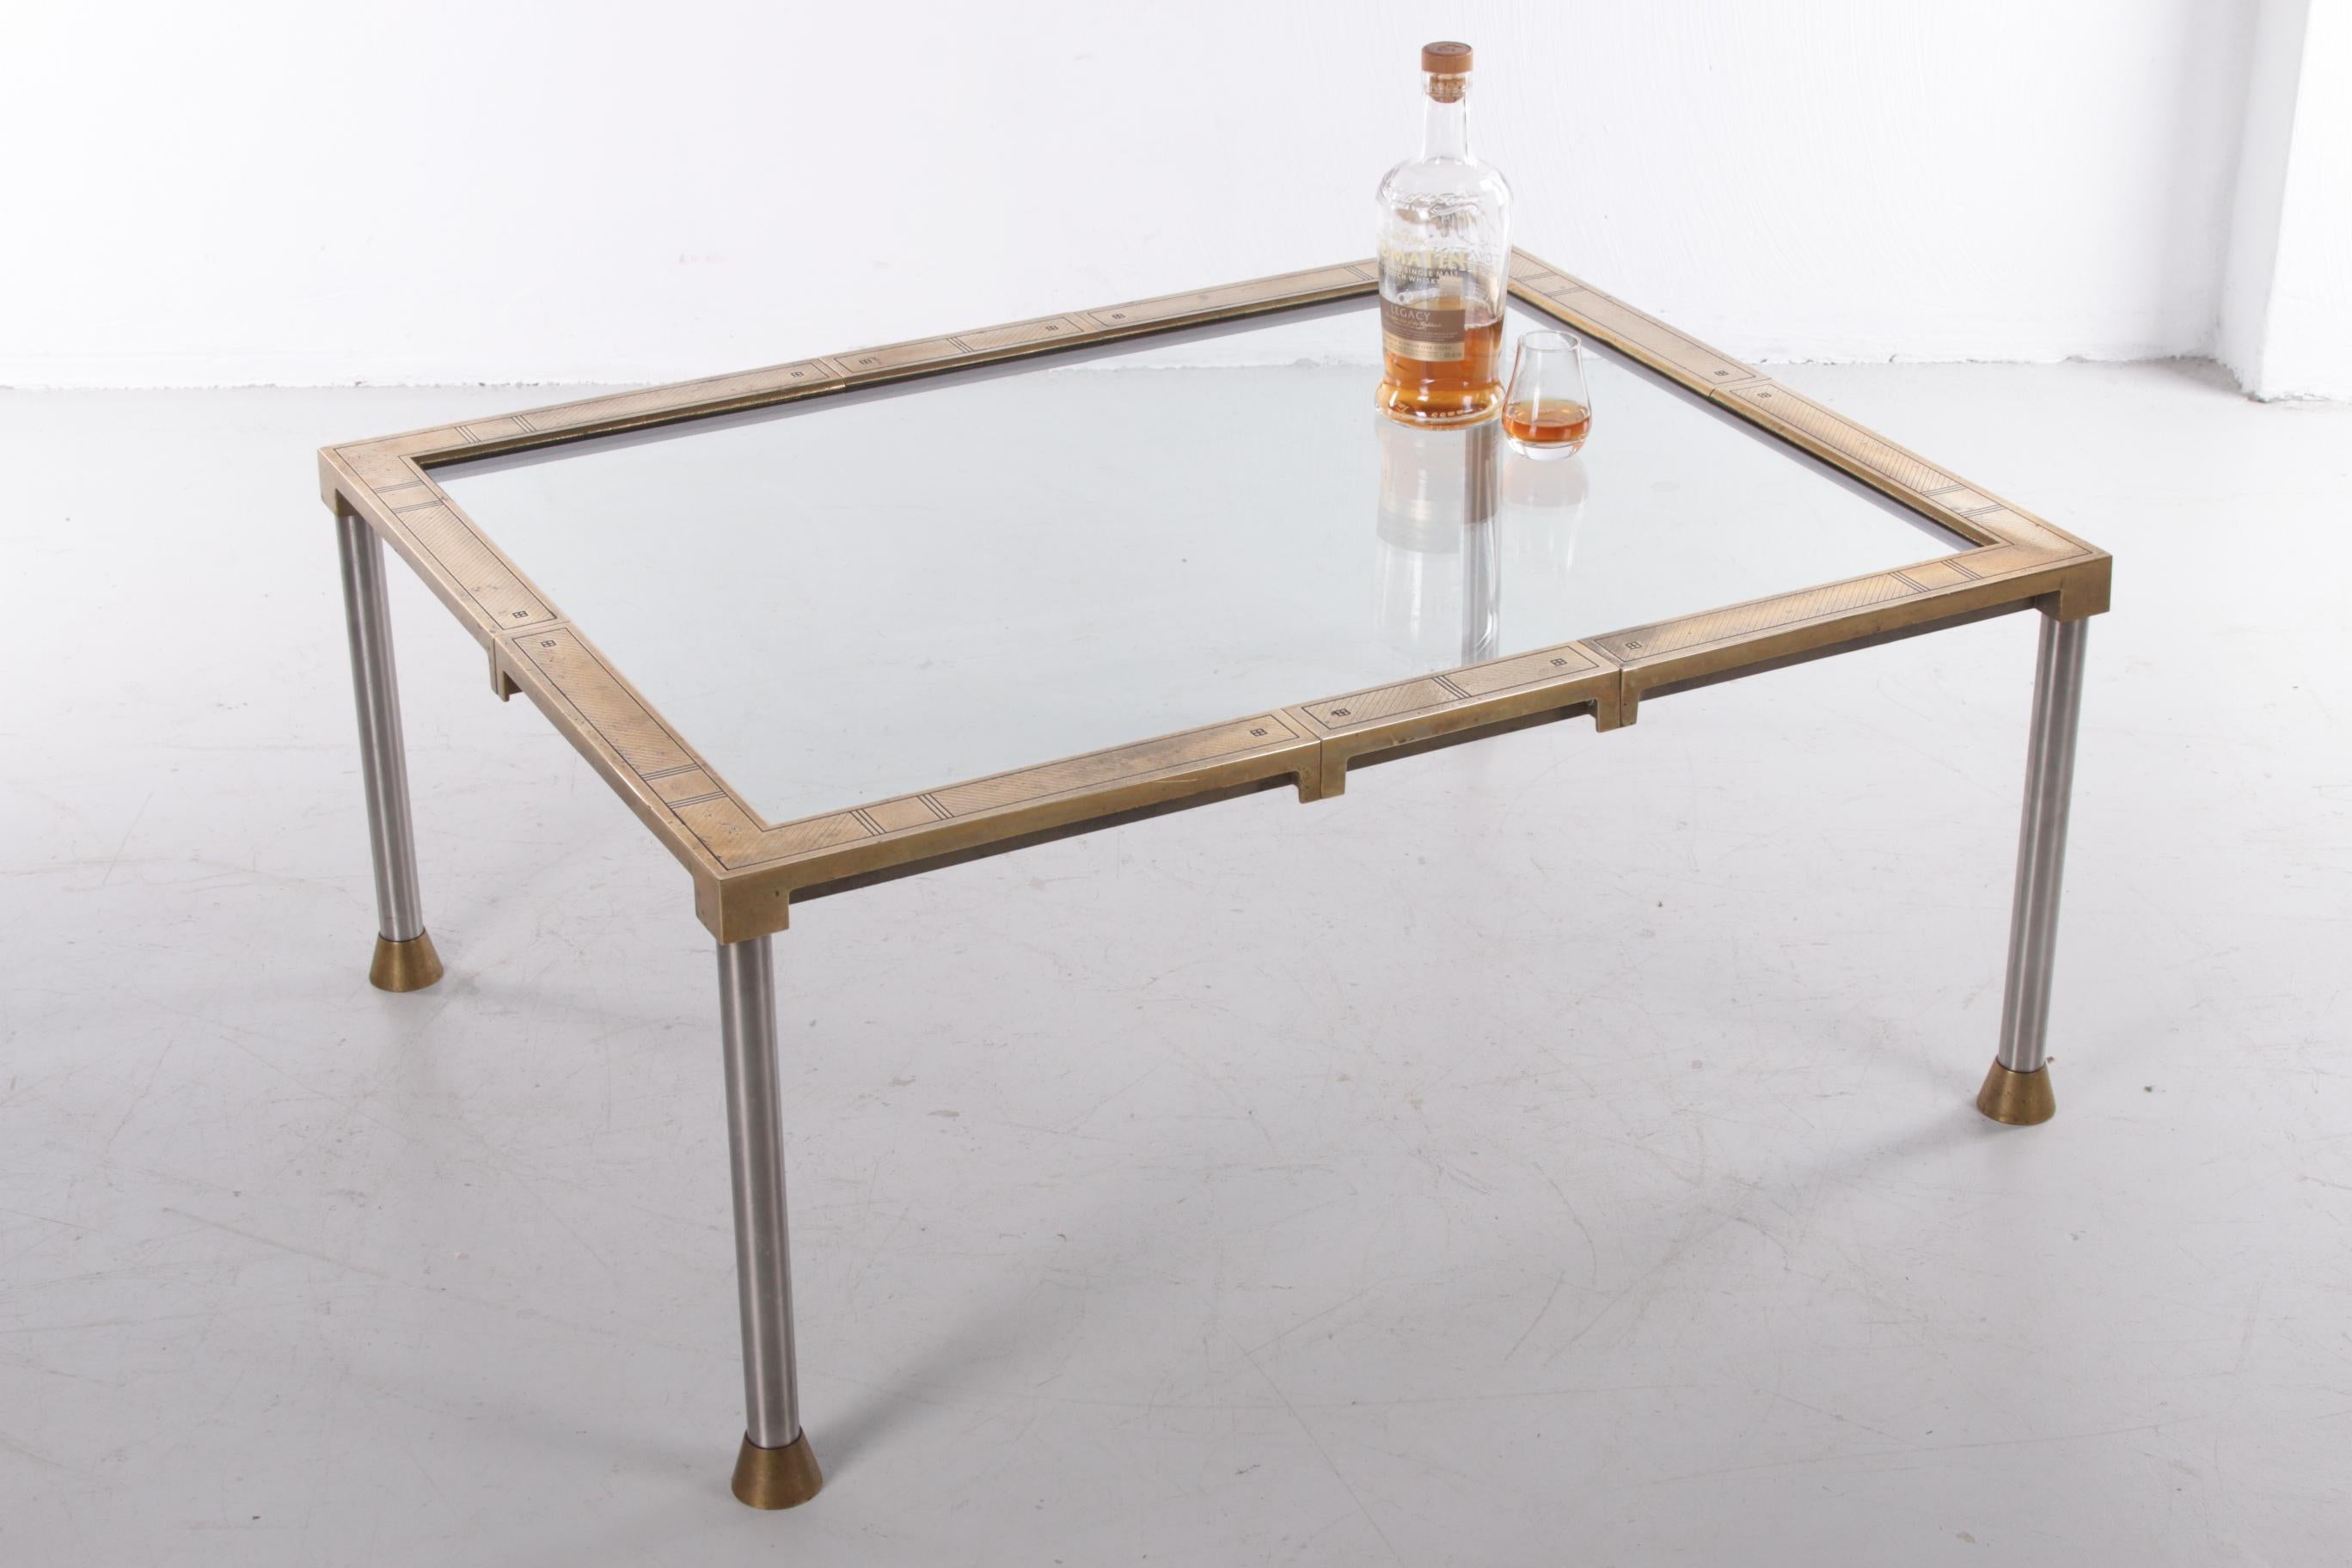 This is a very rare model coffee table, we contacted Peter Ghyczy, who told us that this table was issued once in 1990 for a large fair, the IMM in Cologne in the early 1990s.

At that time 10 tables were made and this is one of them. Therefore,